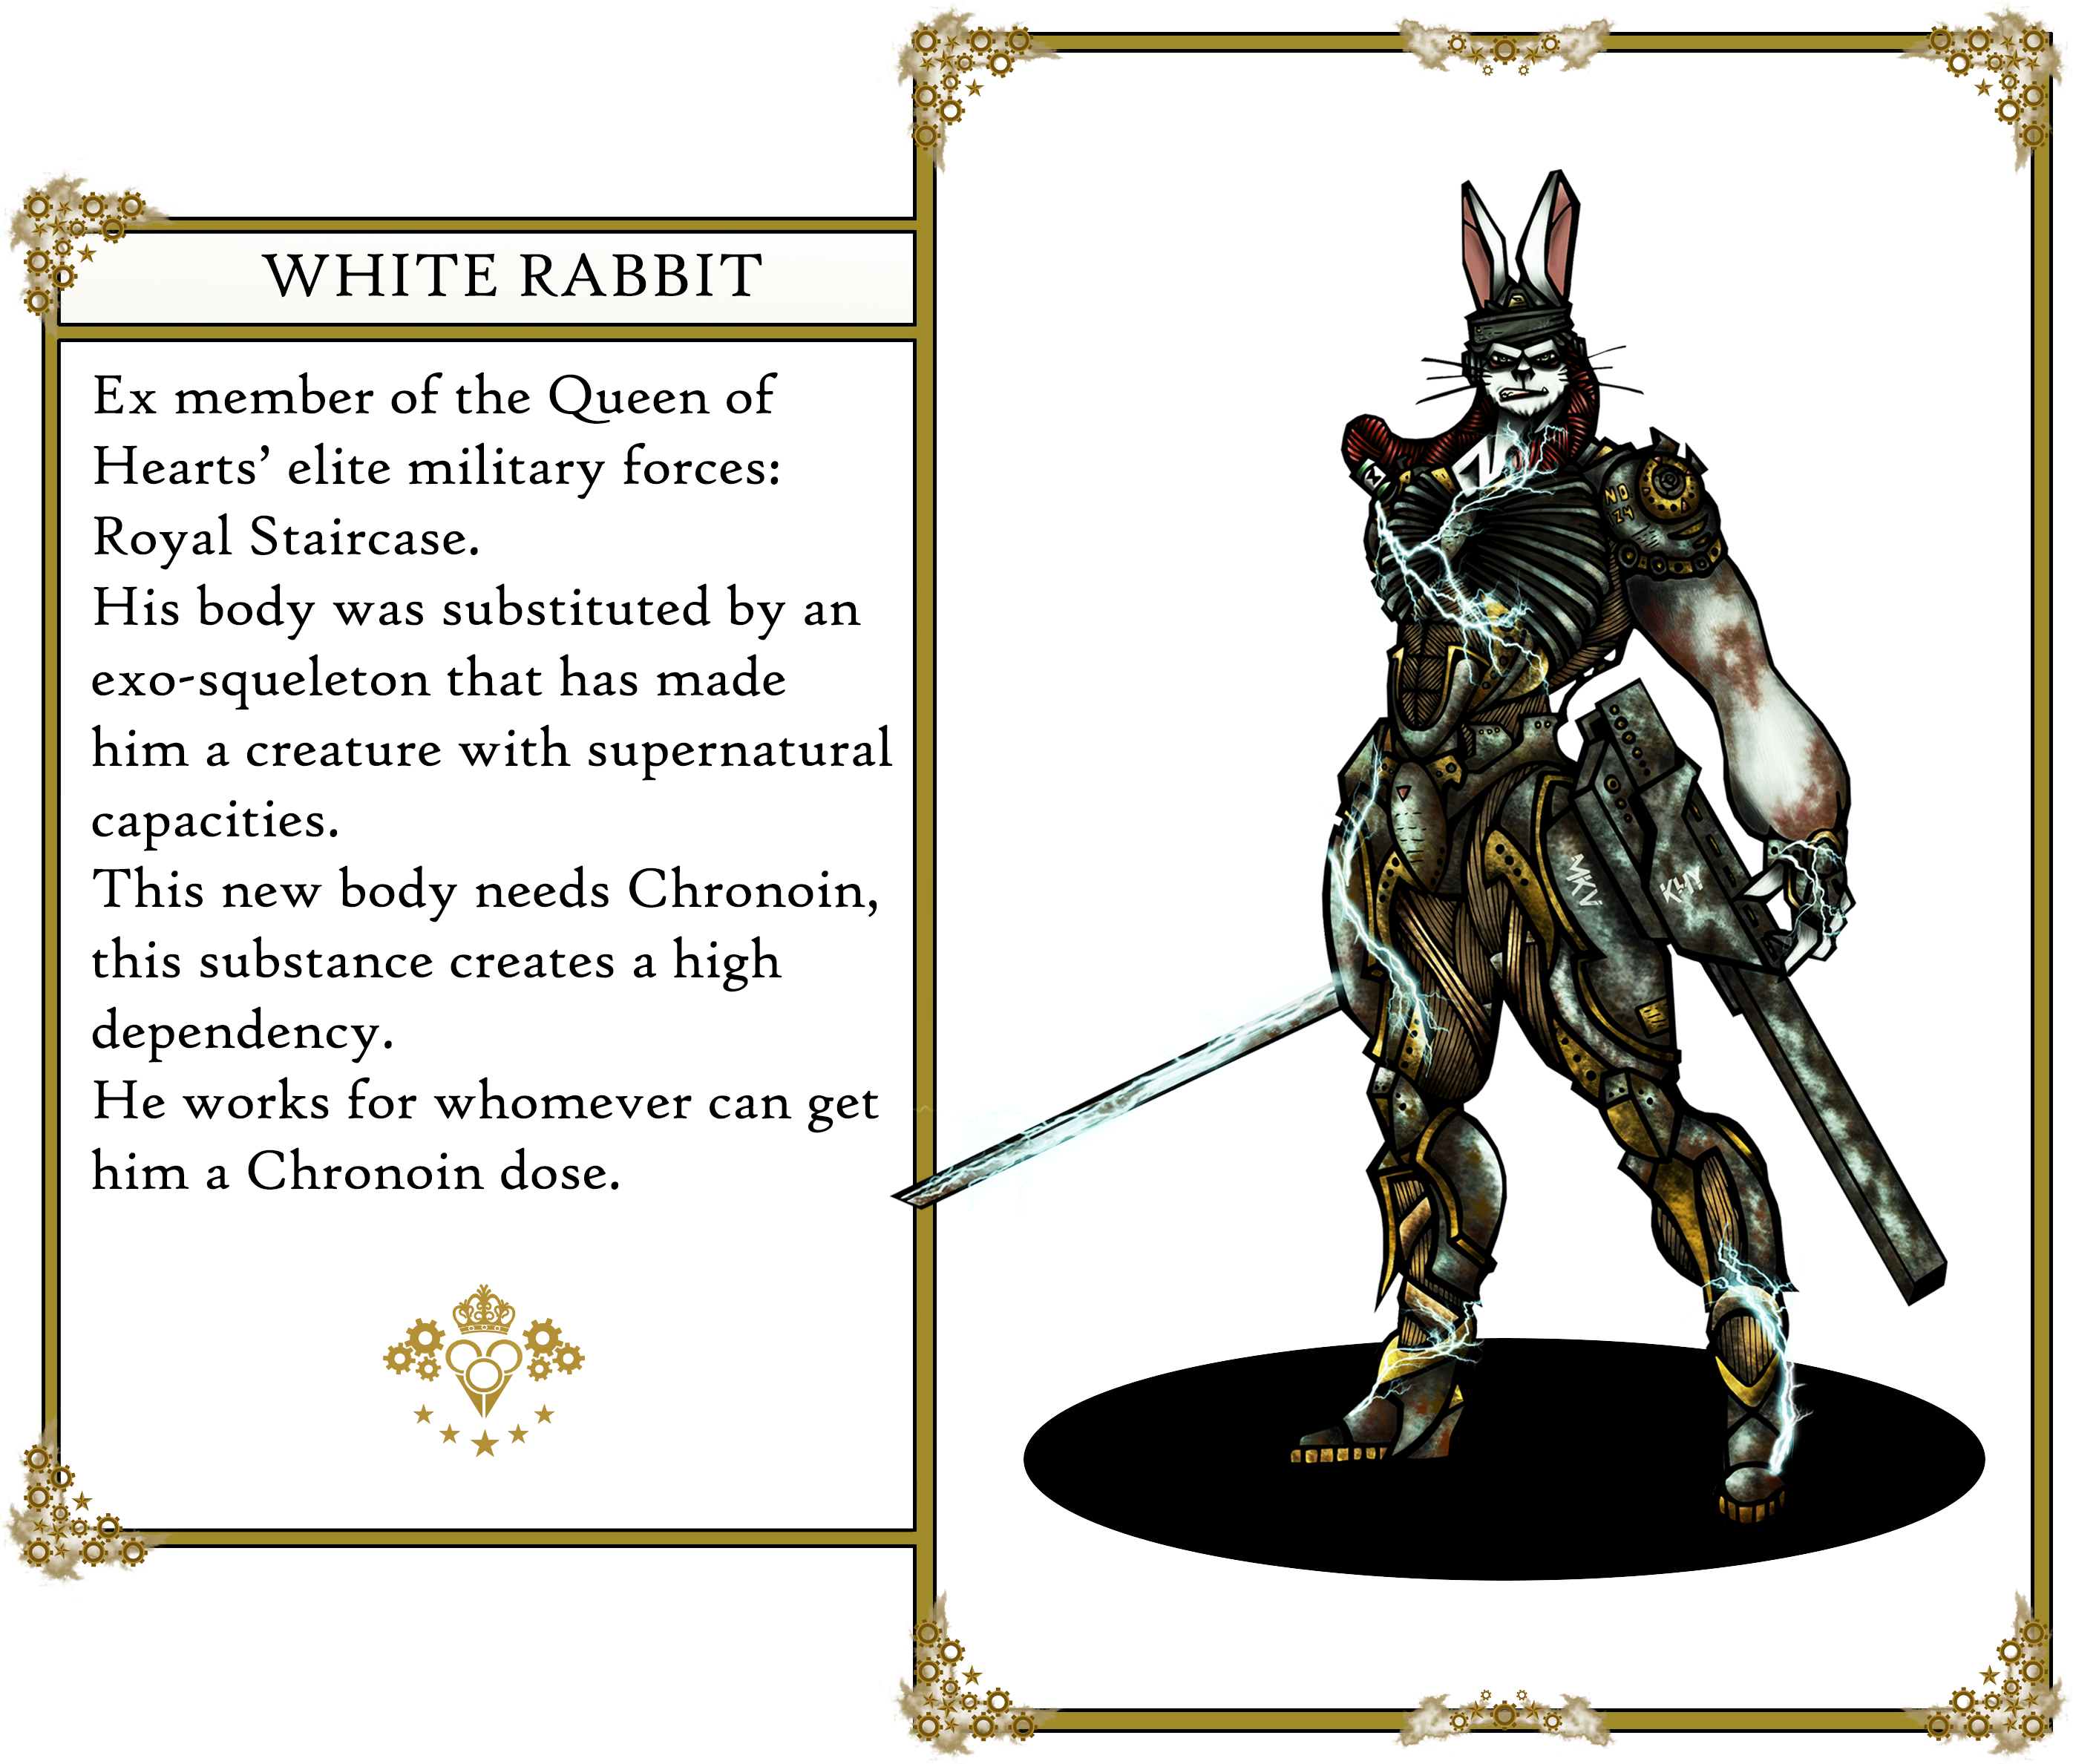 The Oz's tales. White Rabbit: 
                        Ex member of the Queen of Hearts’ elite military forces: Royal Staircase. 
                        His body was substituted by an exo-squeleton that has made him a creature with supernatural capacities. 
                        This new body needs Chronoin, this substance creates a high dependency. He works for whomever can get him a Chronoin dose.